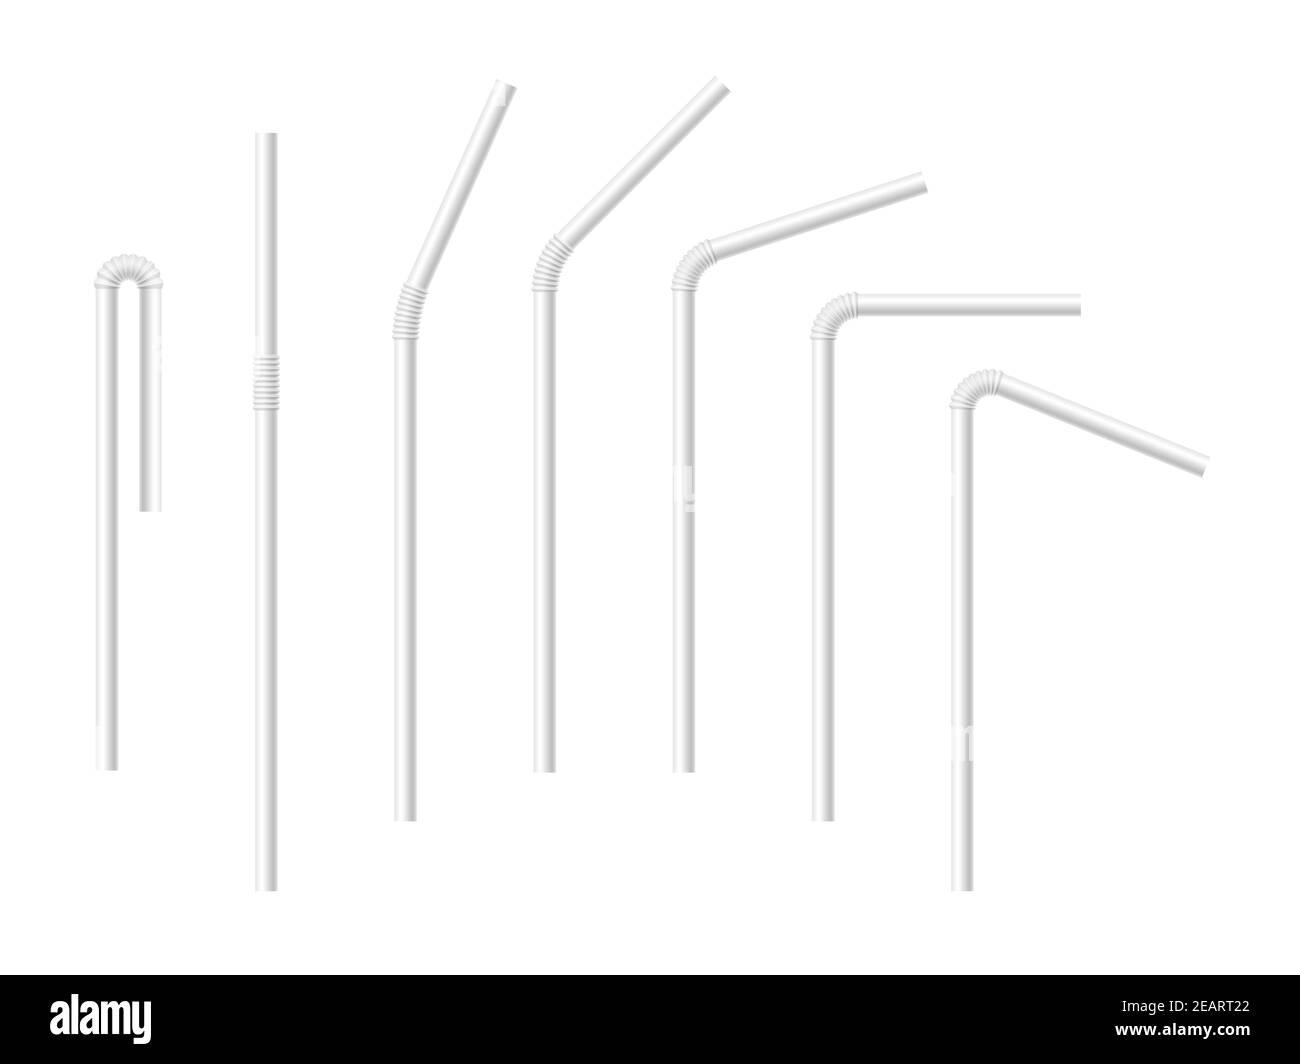 Drinking straws Black and White Stock Photos & Images - Alamy